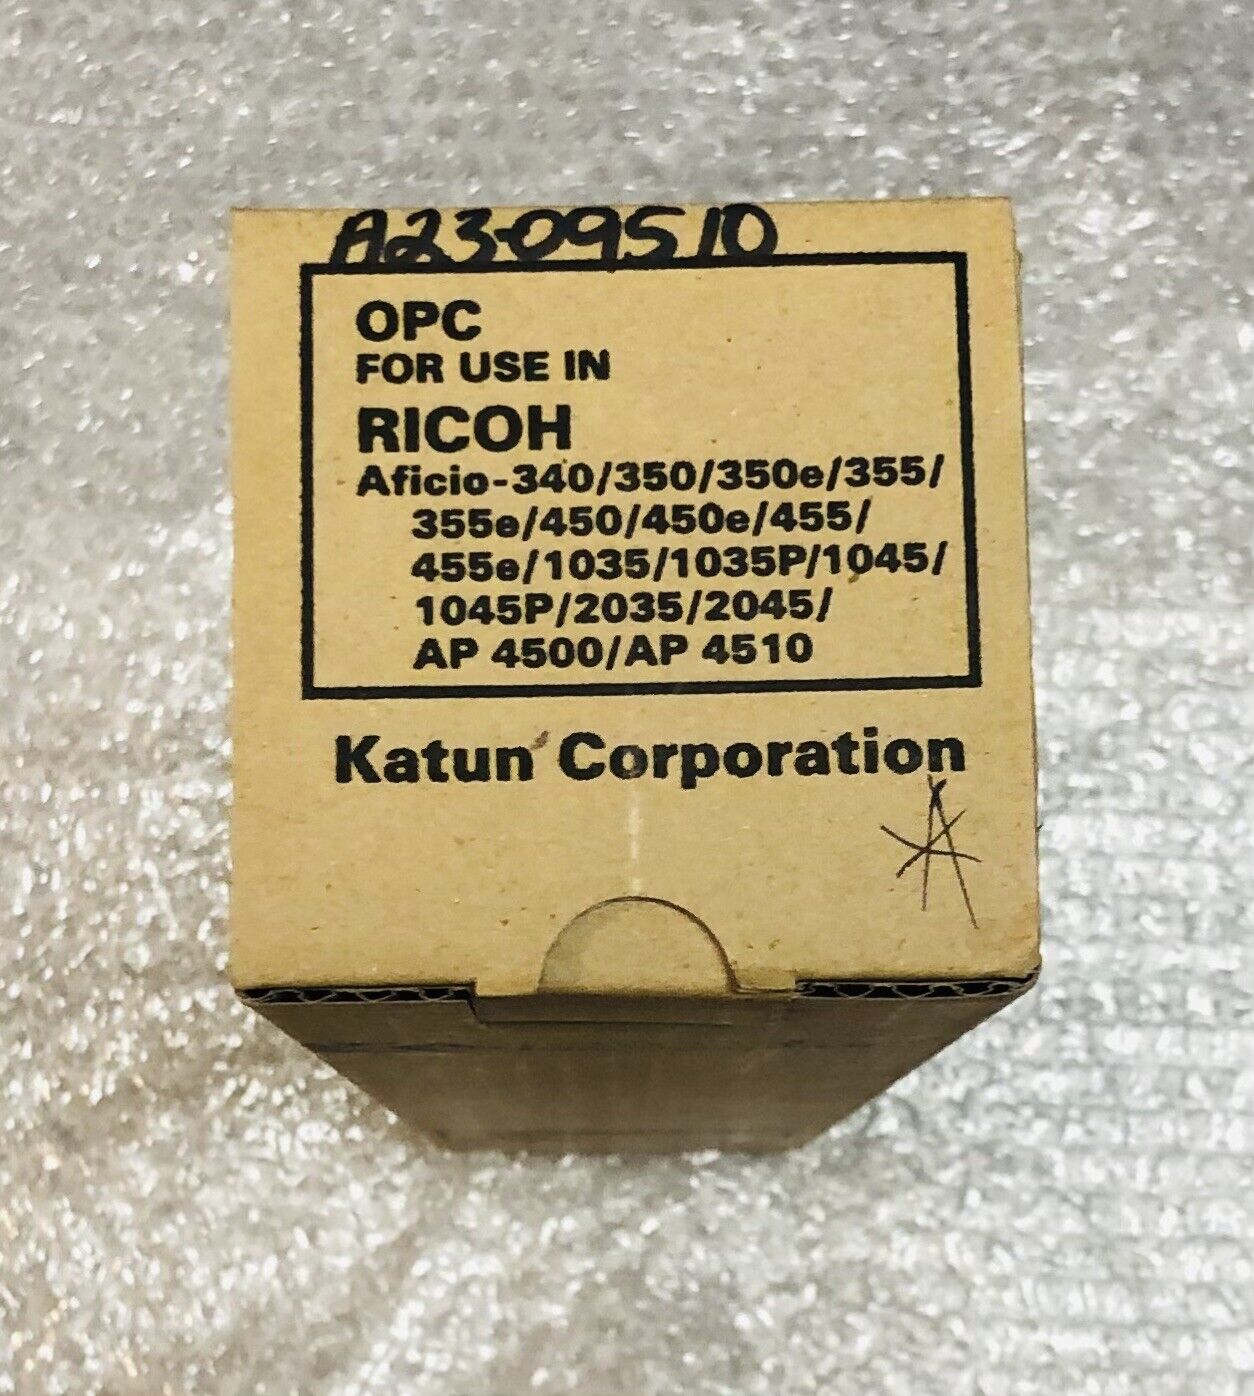 NEW KATUN OPC DRUM - A2309510 - COMPATIBLE WITH RICOH MODELS